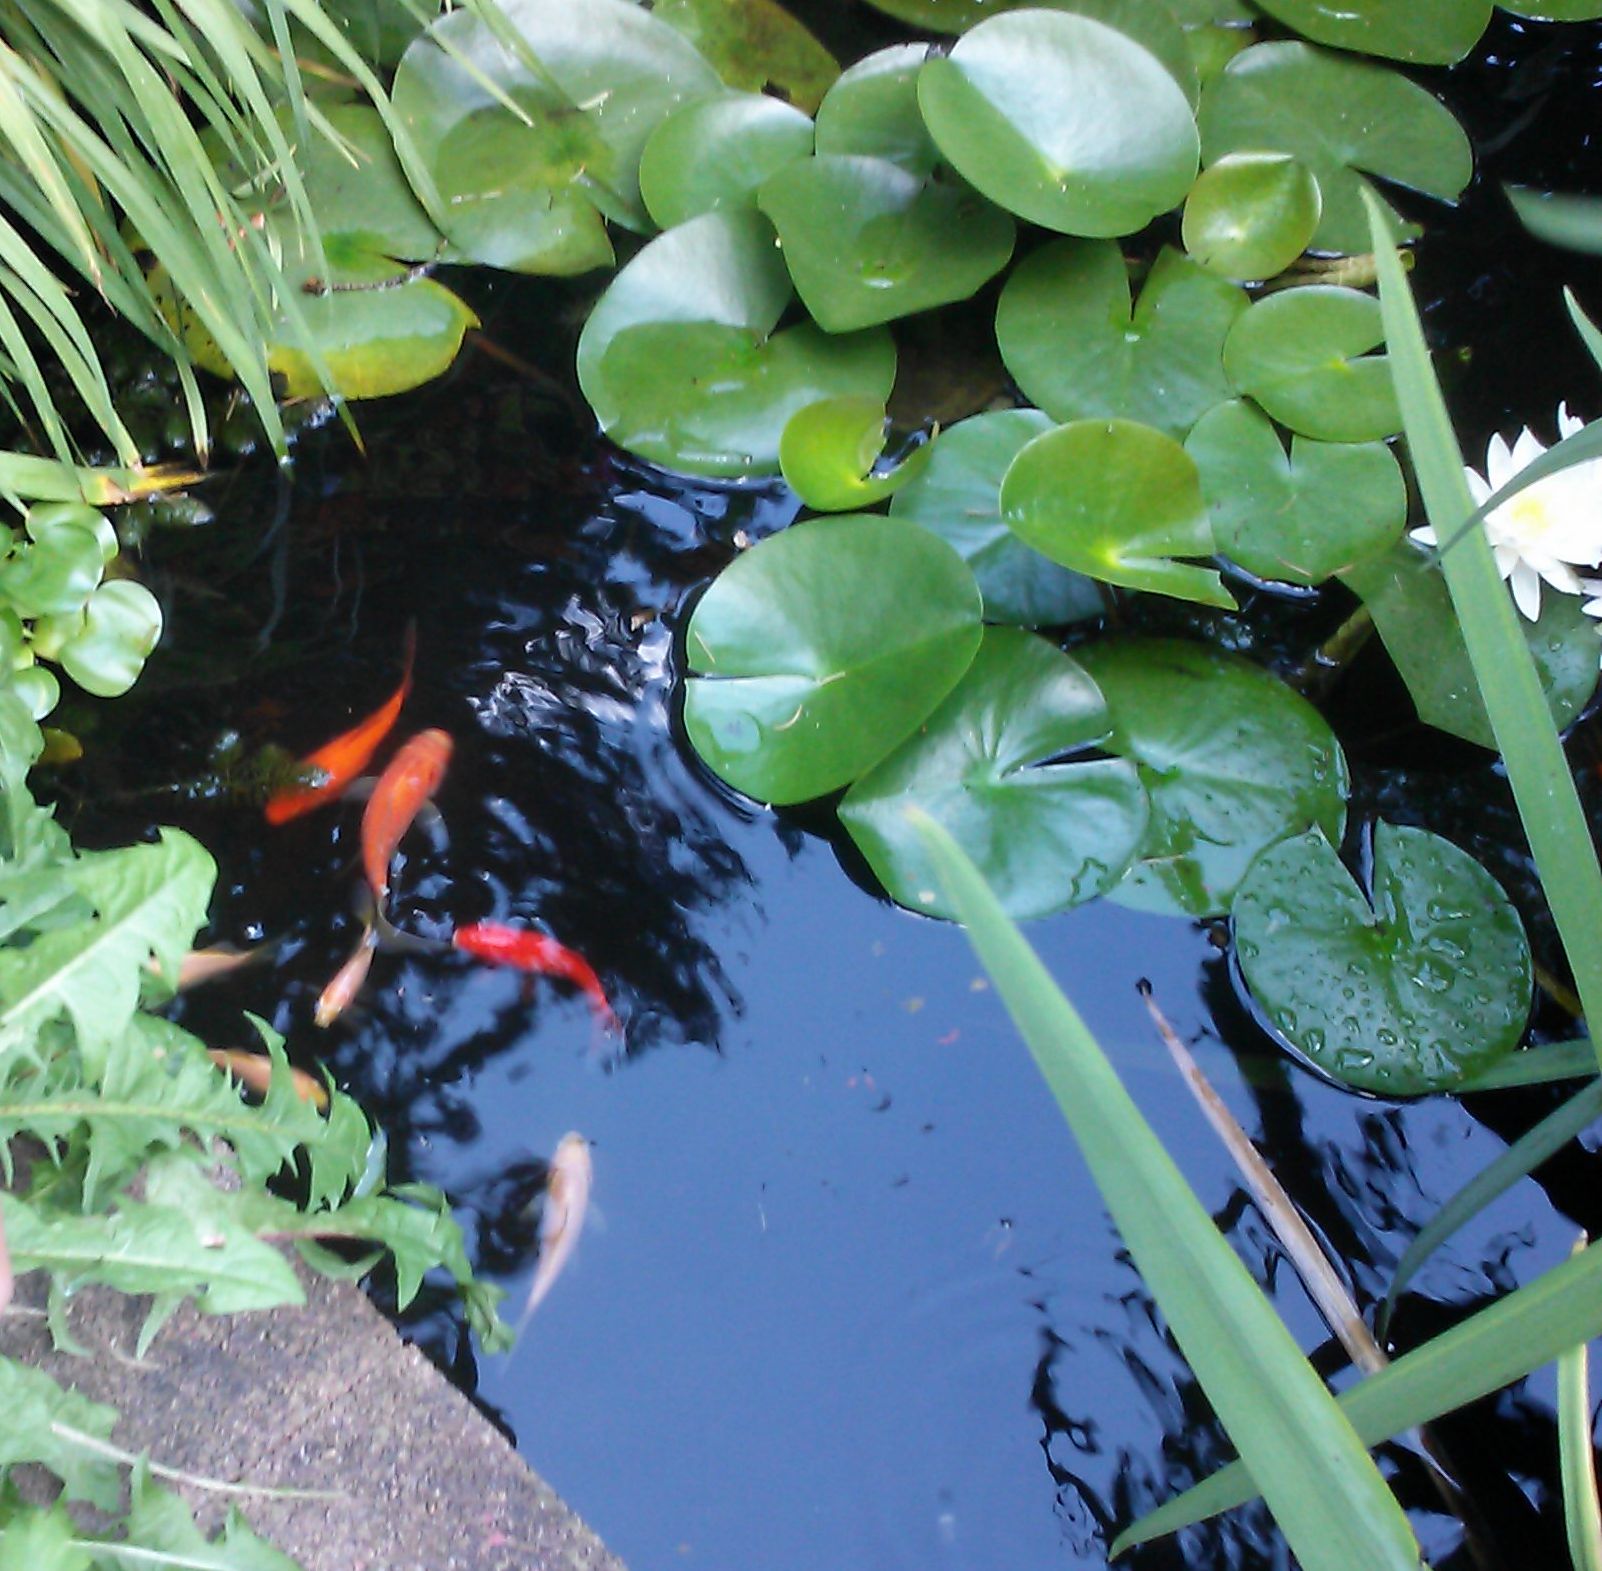 Goldfish swim in dark water with lily pads.